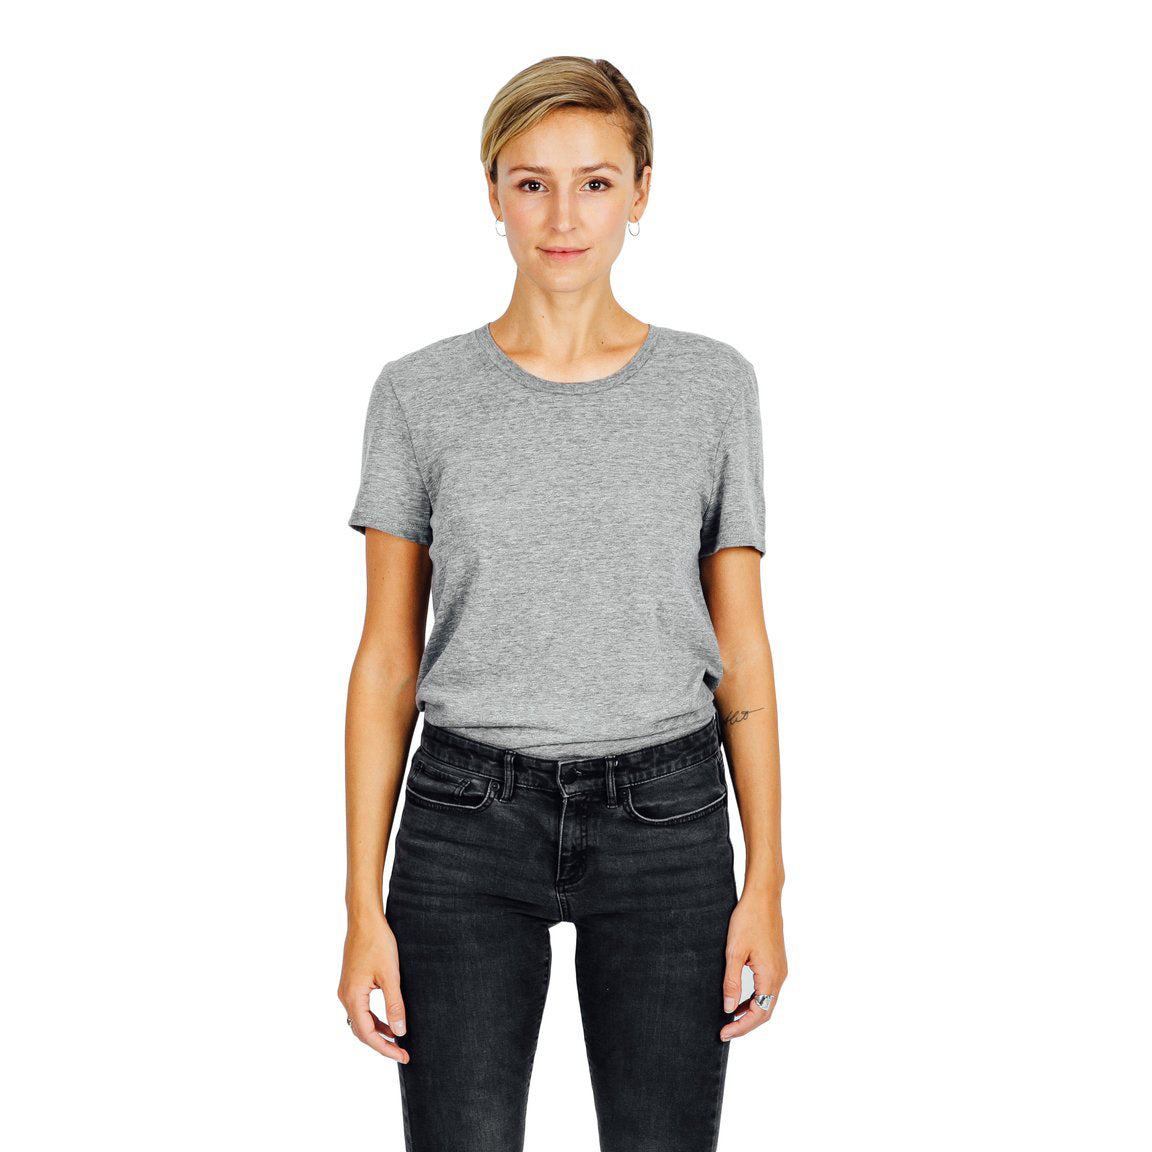 Women's Refined Fit Tee - Grey Mix